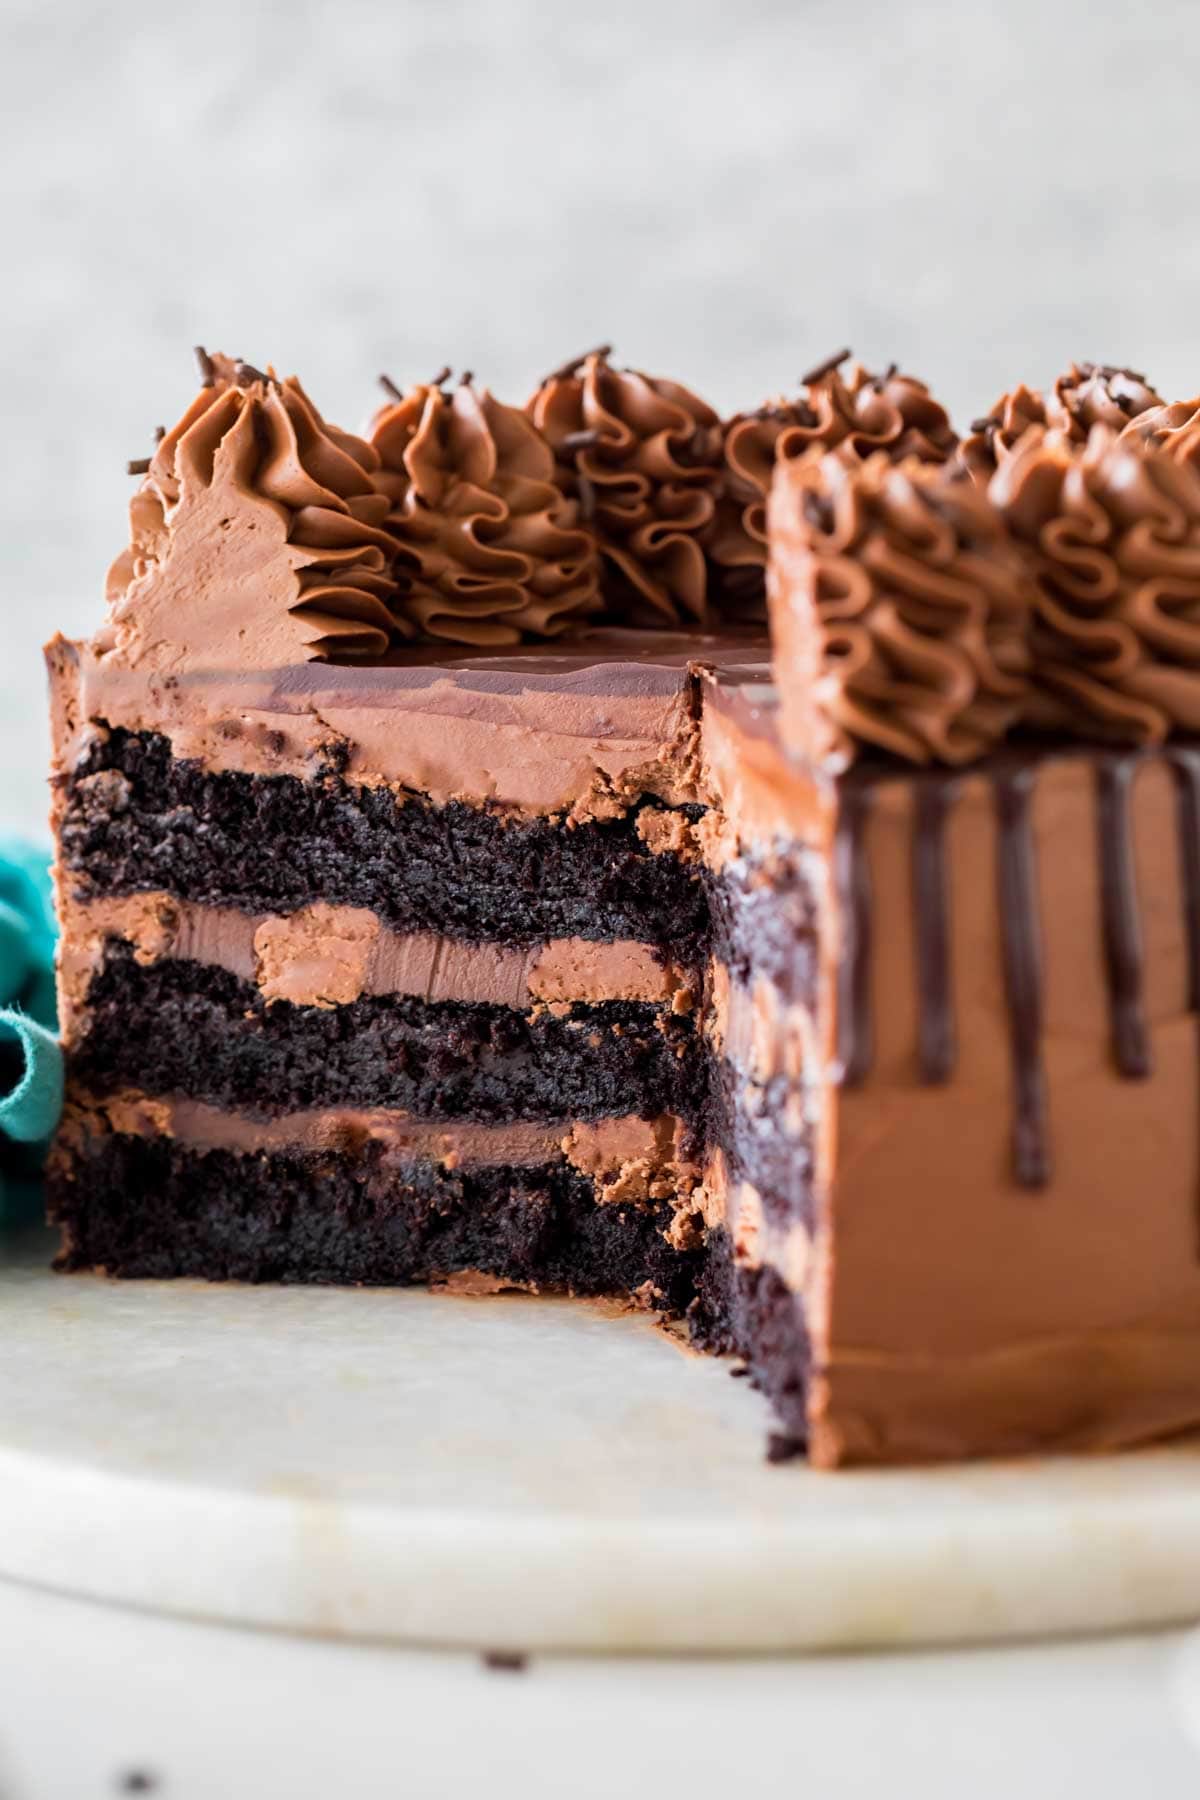 Cross section of a chocolate cake consisting of three layers of cake, chocolate ganache, and chocolate frosting.